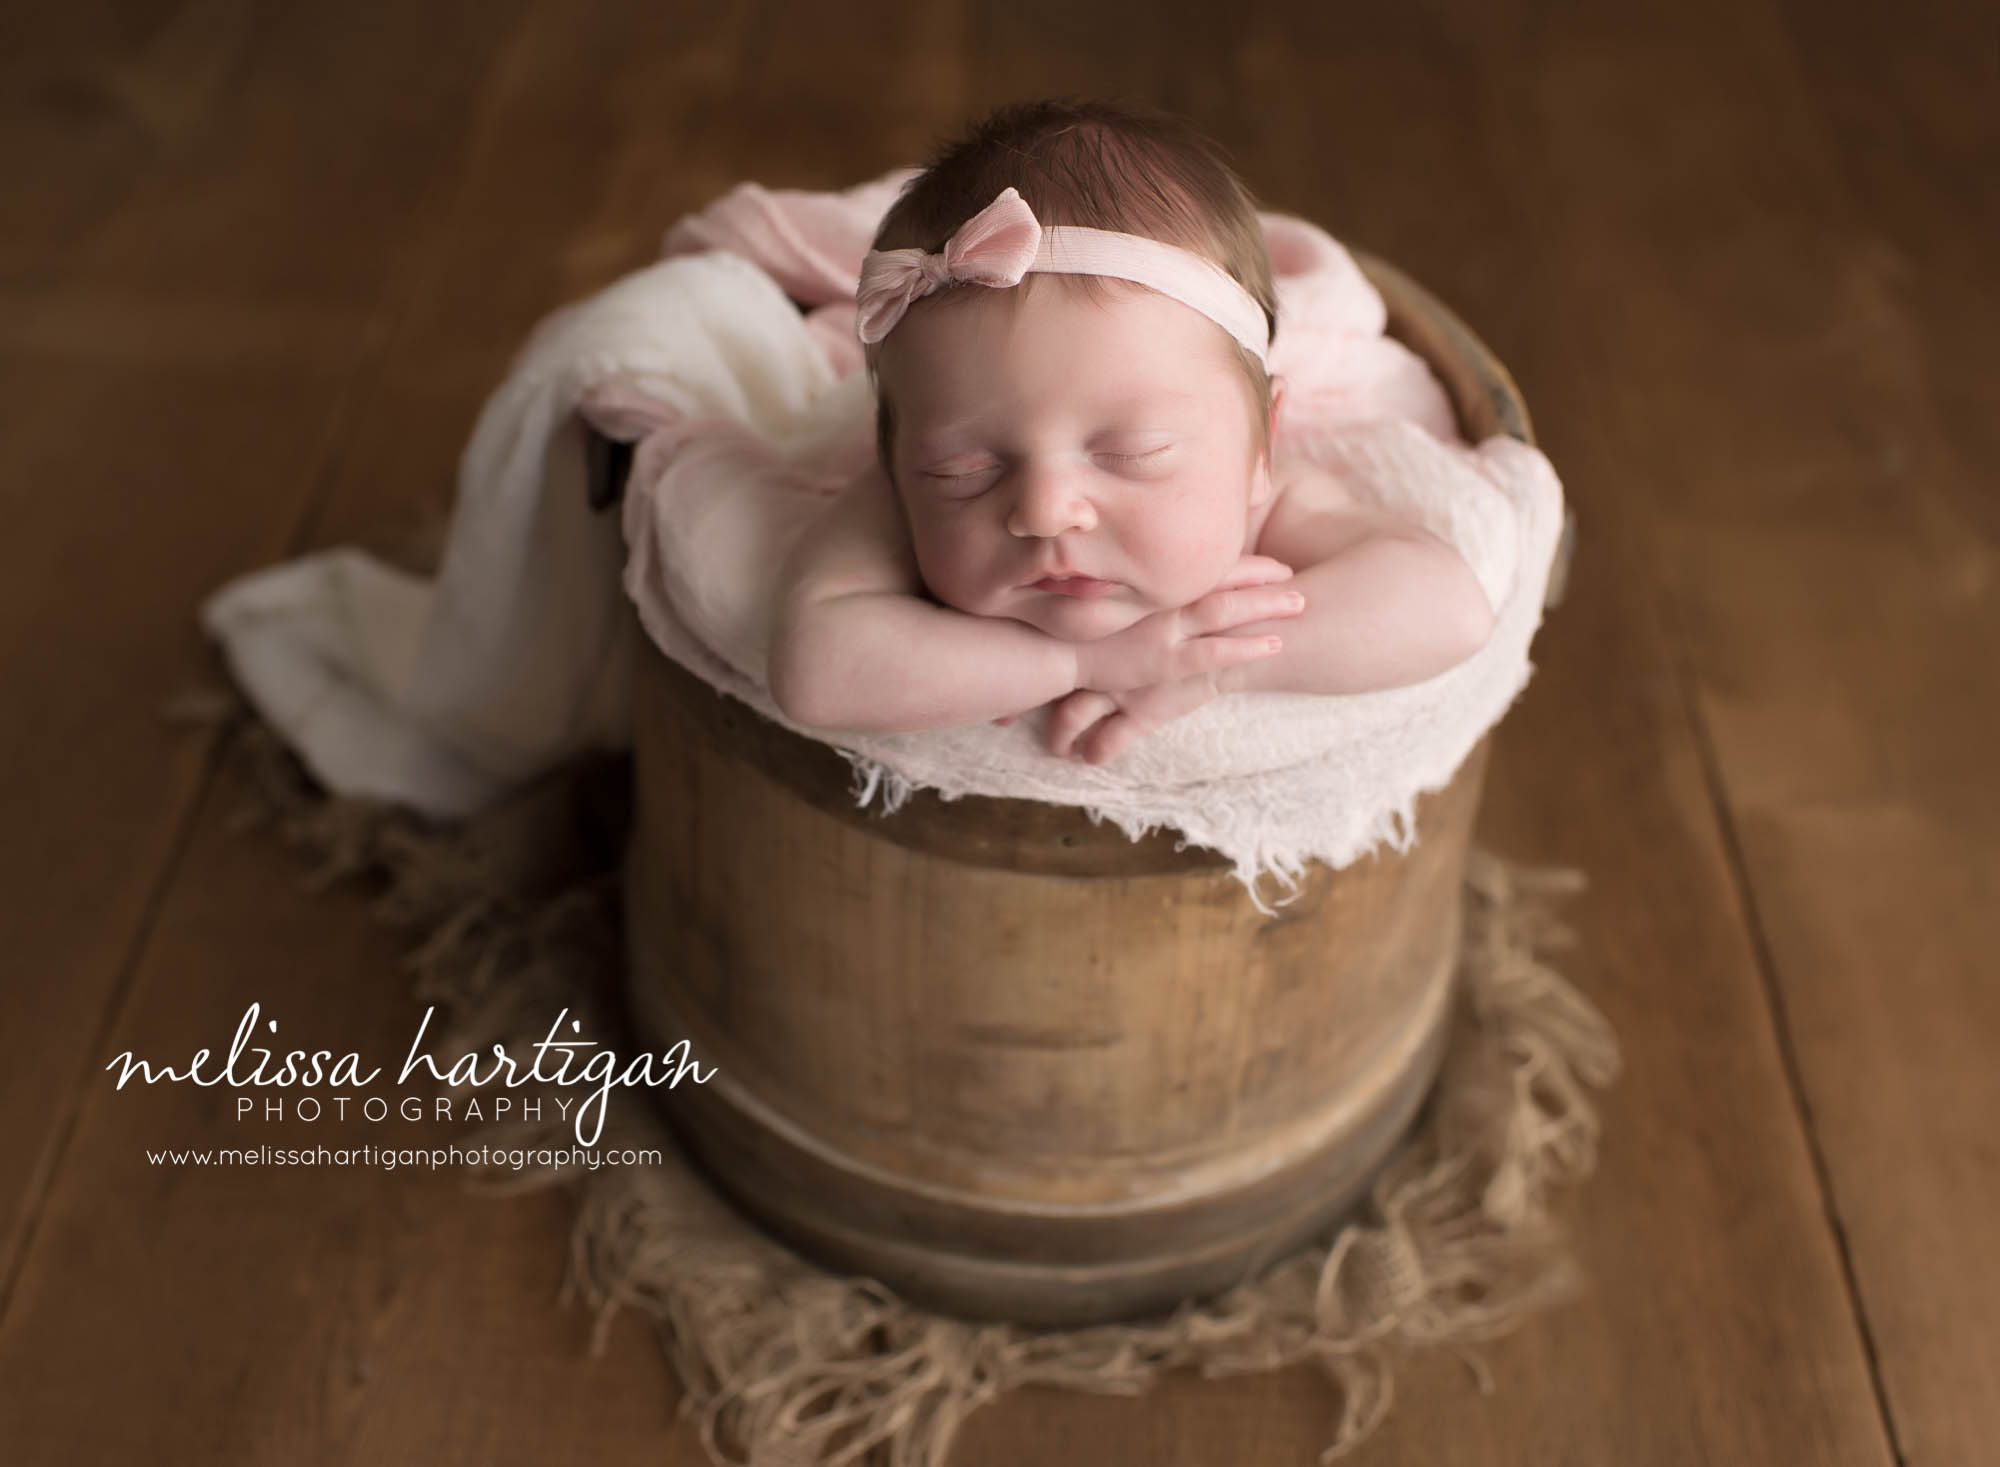 Melissa Hartigan Photography Connecticut Newborn Twin Photographer Coventry Ct Middlefield CT baby Fairfield county Newborn and maternity CT photographer Newborn twin photographer baby girl in wooden basket with pink blanket and headband